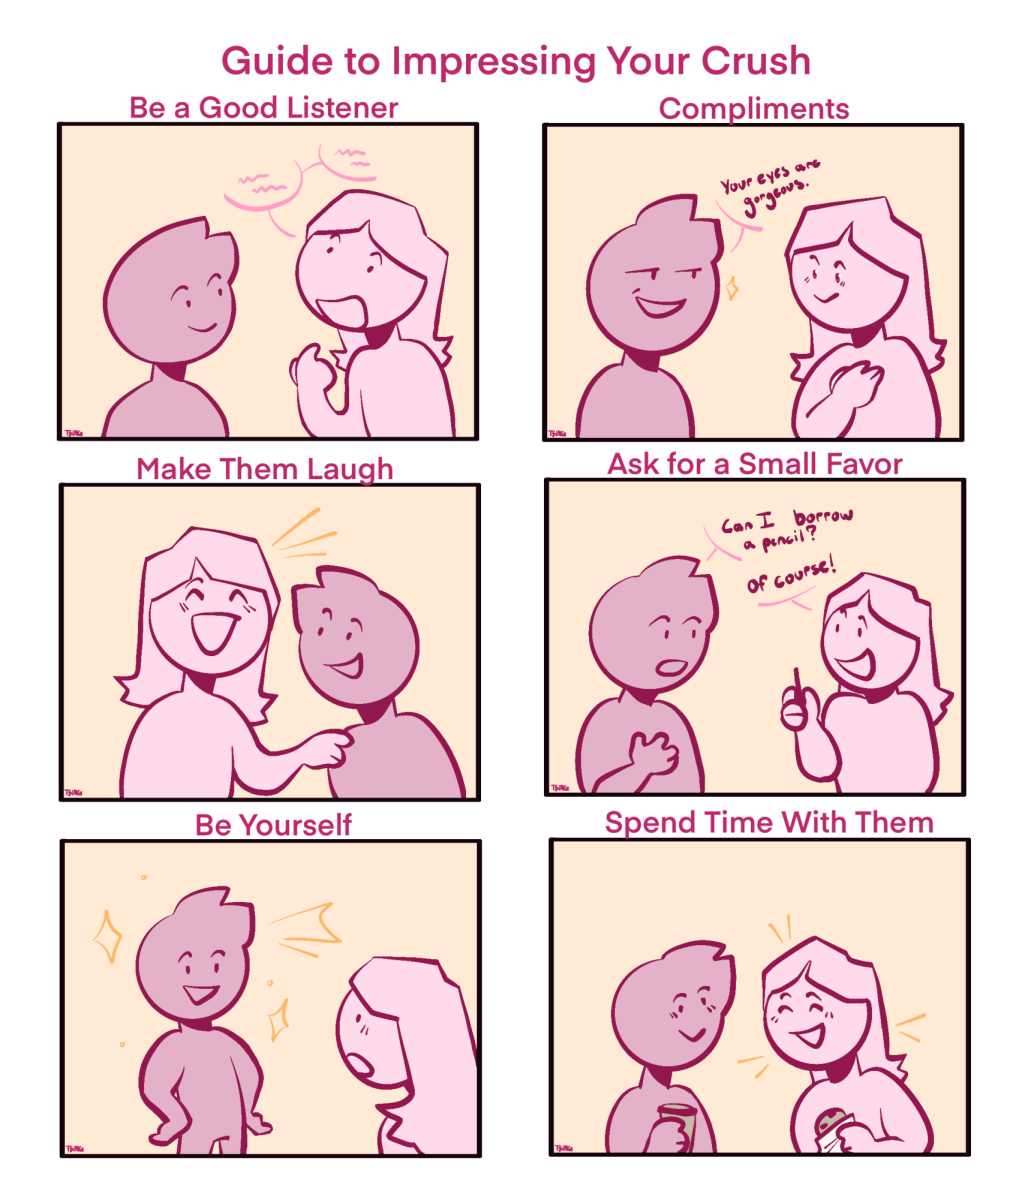 Guide to Impressing Your Crush